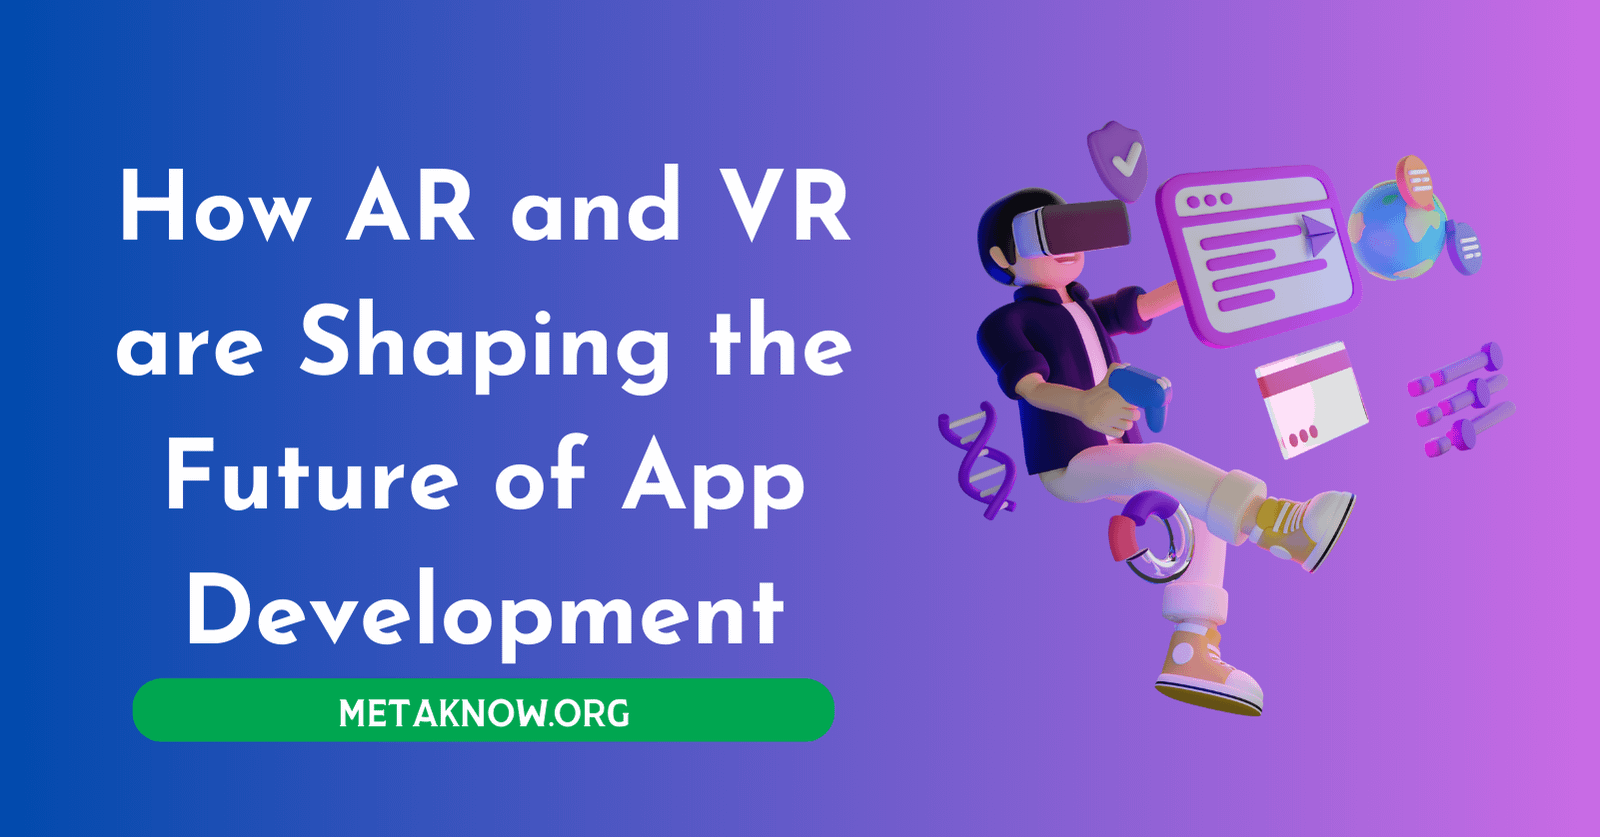 How AR and VR are Shaping the Future of App Development